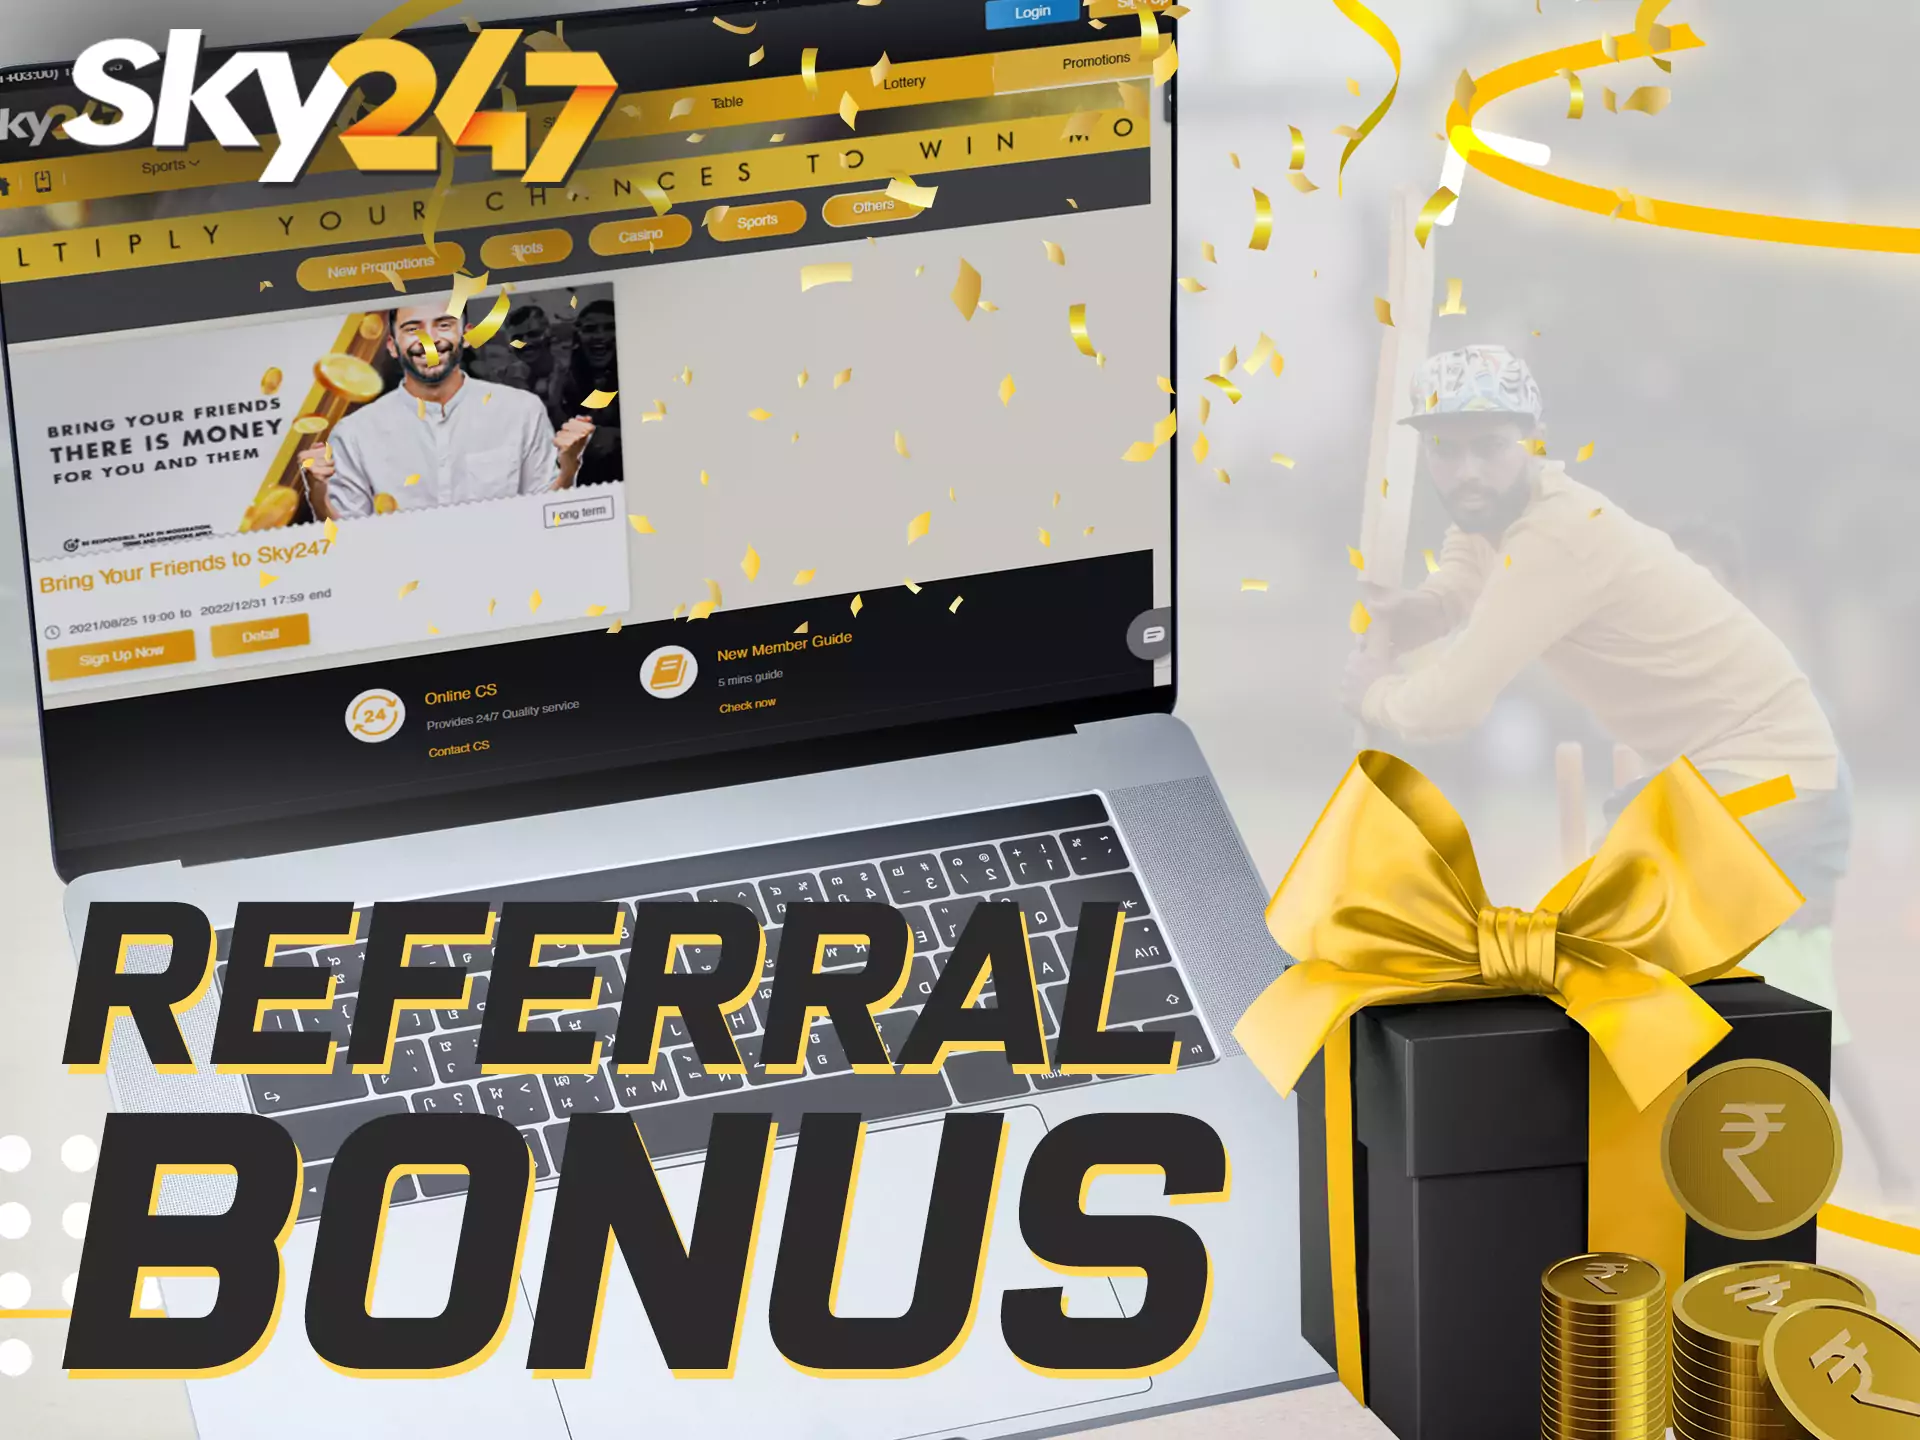 The referral bonus of Sky247 is the perfect way to increase your profit with ease.